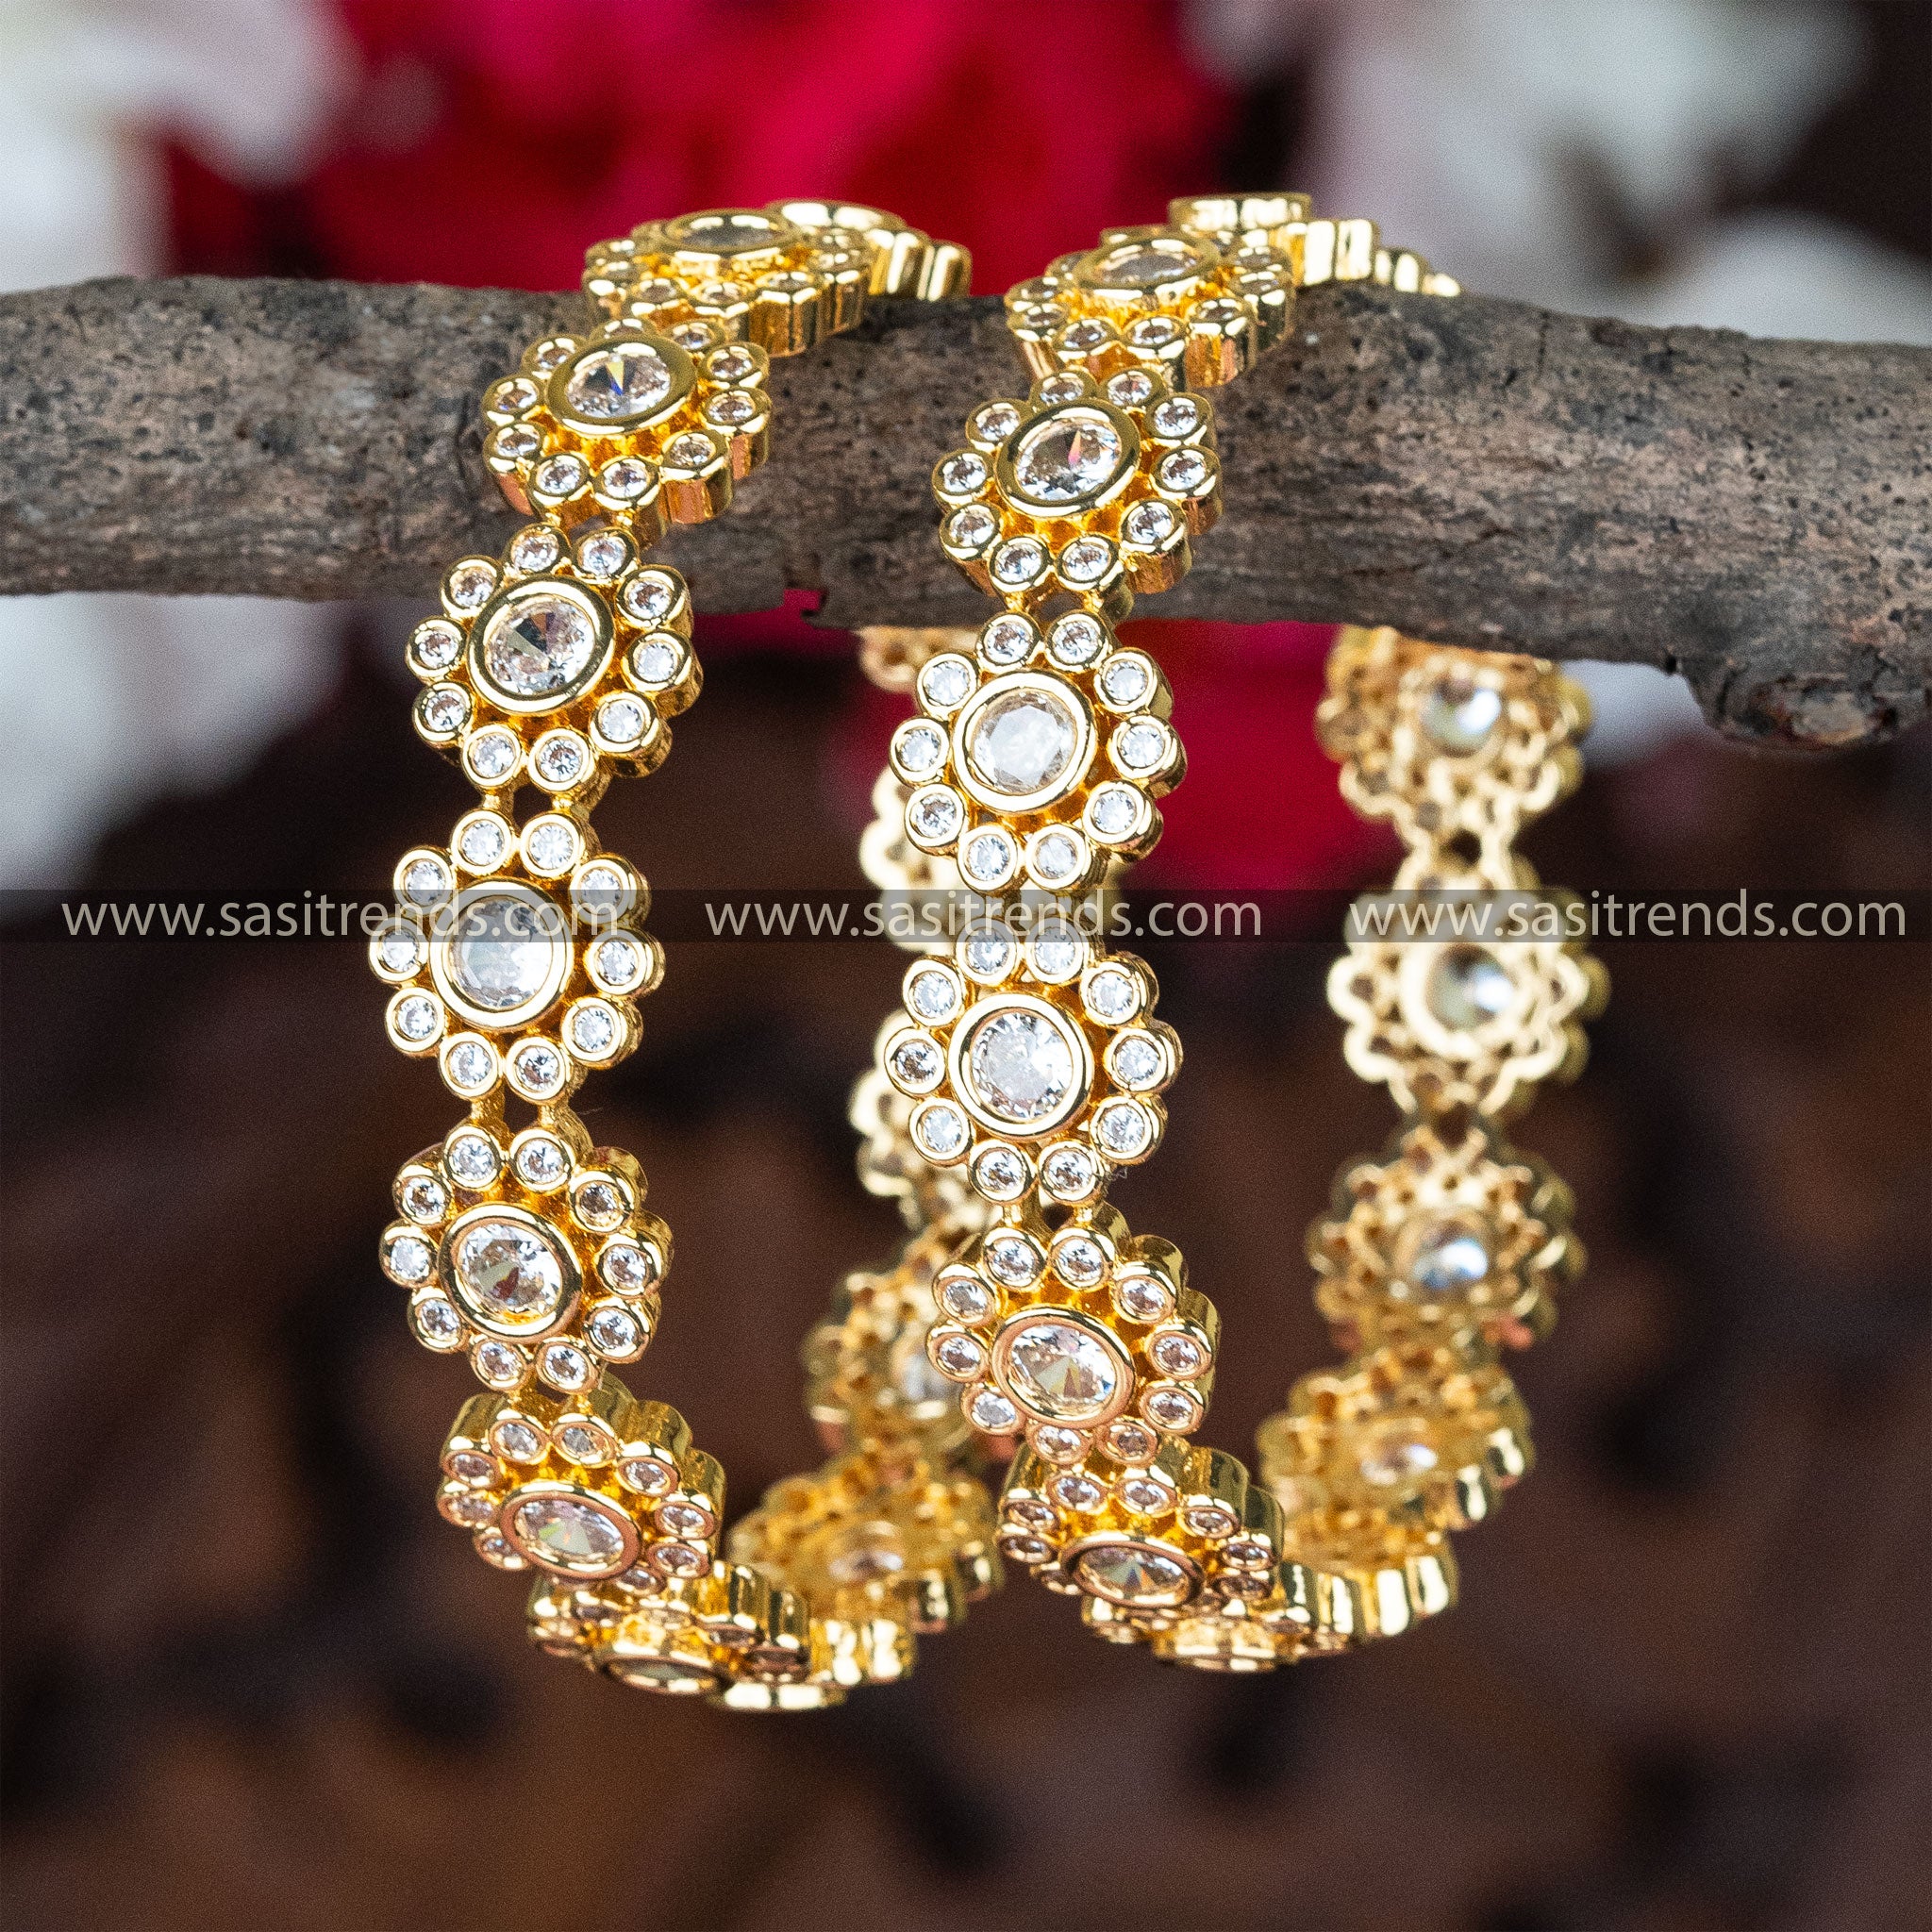 American Diamond Bracelet Archives - Imitation Jewellery Online /  Artificial Jewelry Shopping for Womens